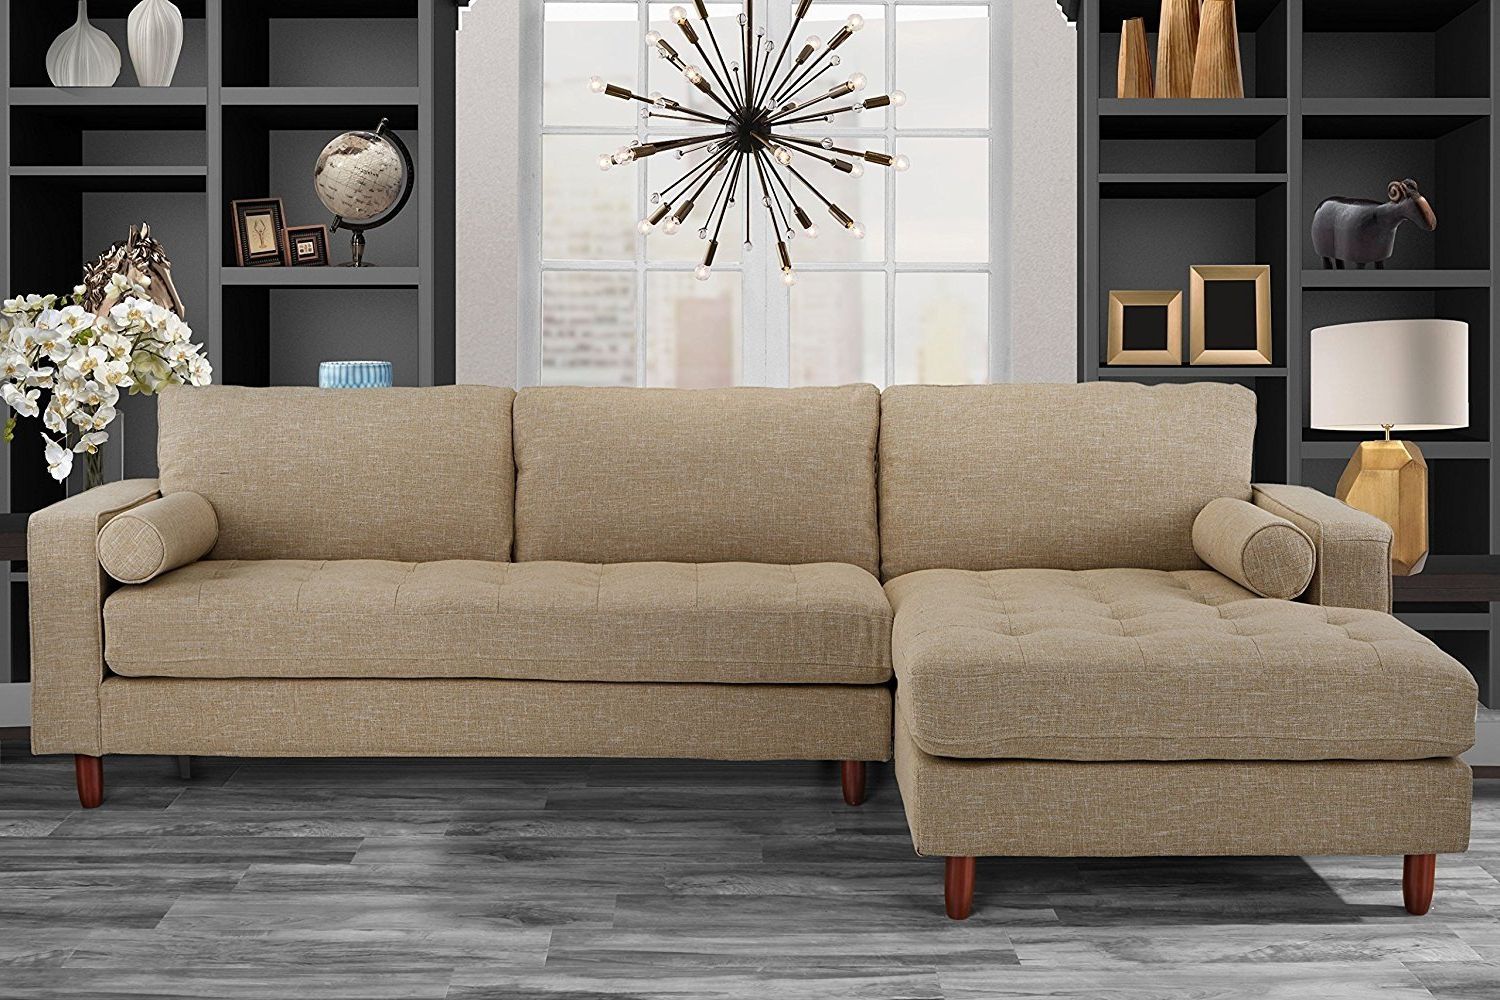 Mid Century Modern Tufted Fabric Sectional Sofa, L Shape Couch Beige Pertaining To Small L Shaped Sectional Sofas In Beige (View 5 of 20)